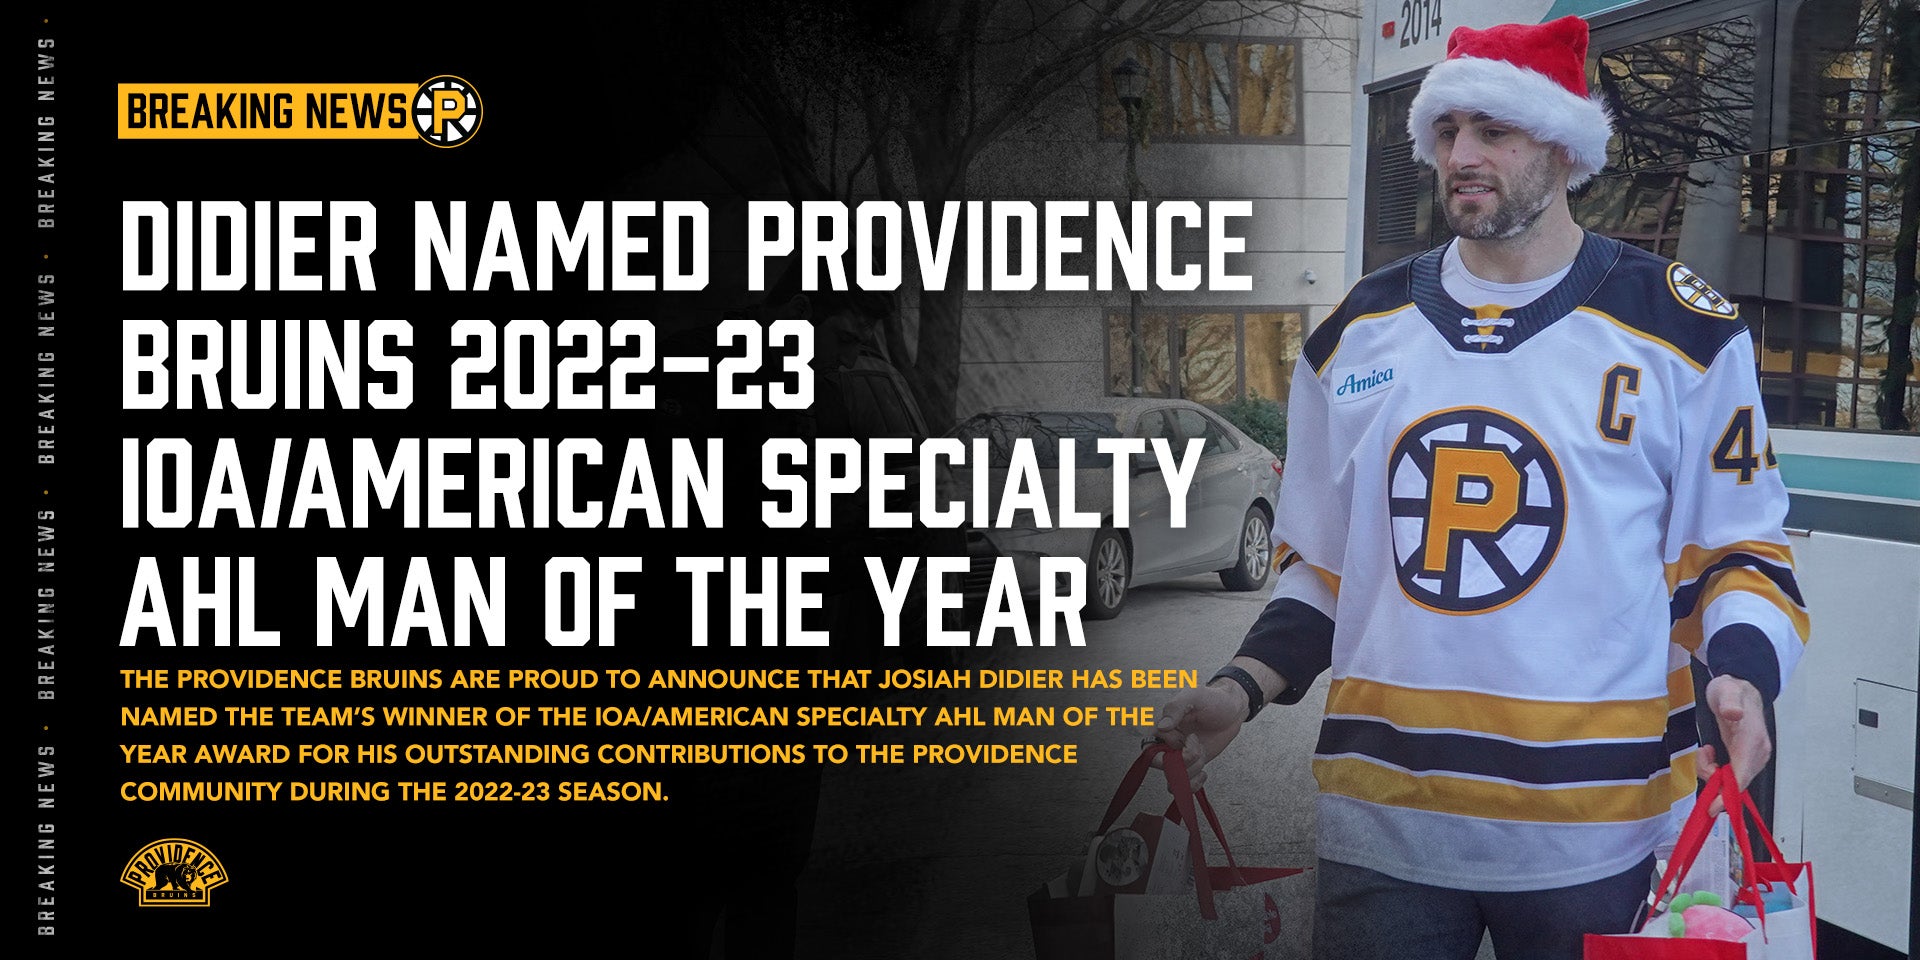 Get your favorite game worn or player - Providence Bruins